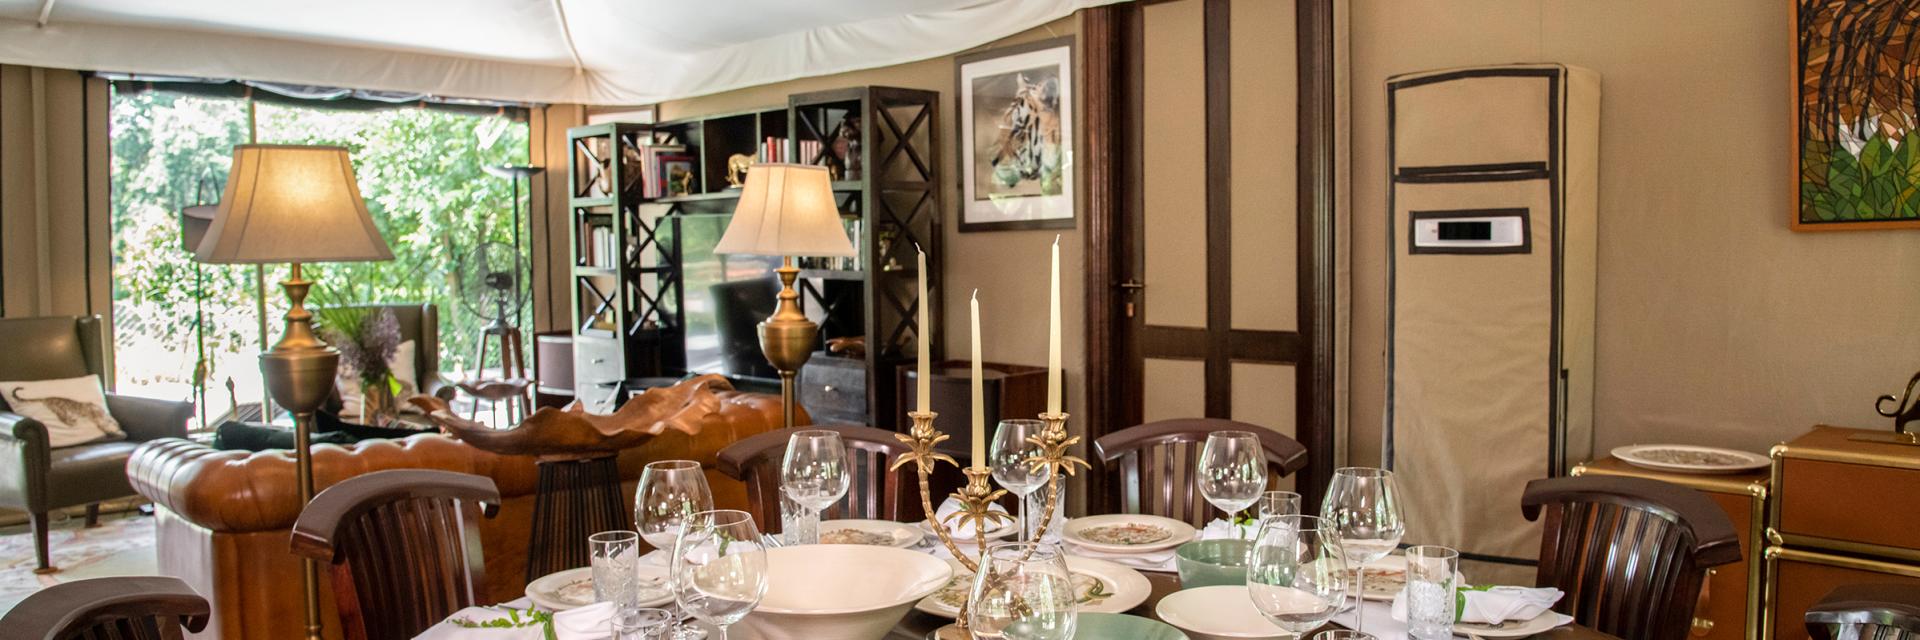 Royal Tent Dining Room